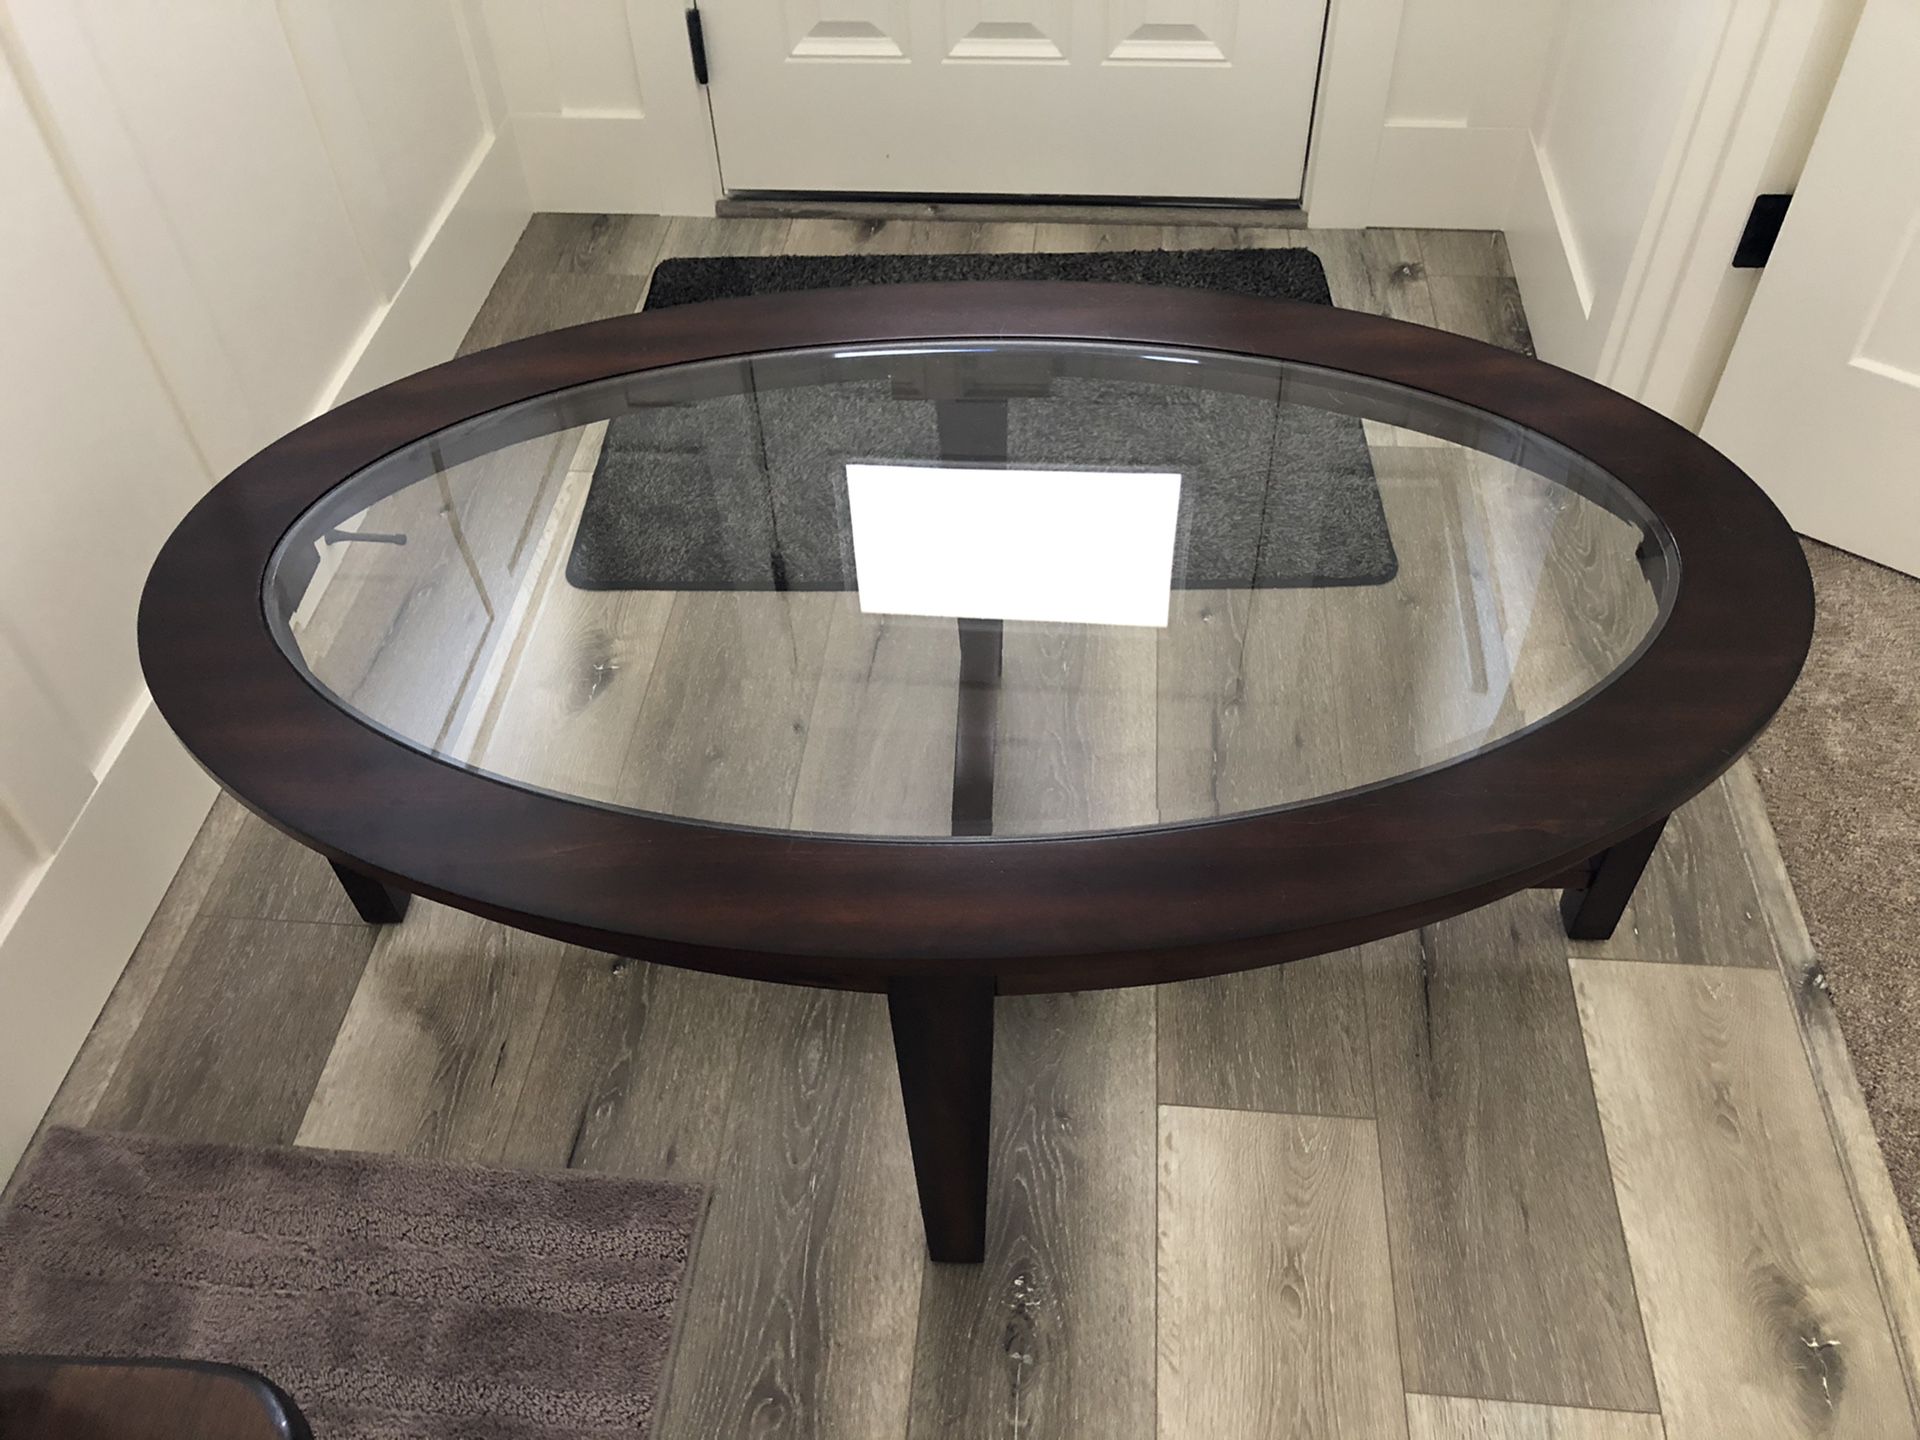 Oval glass coffee table in great condition